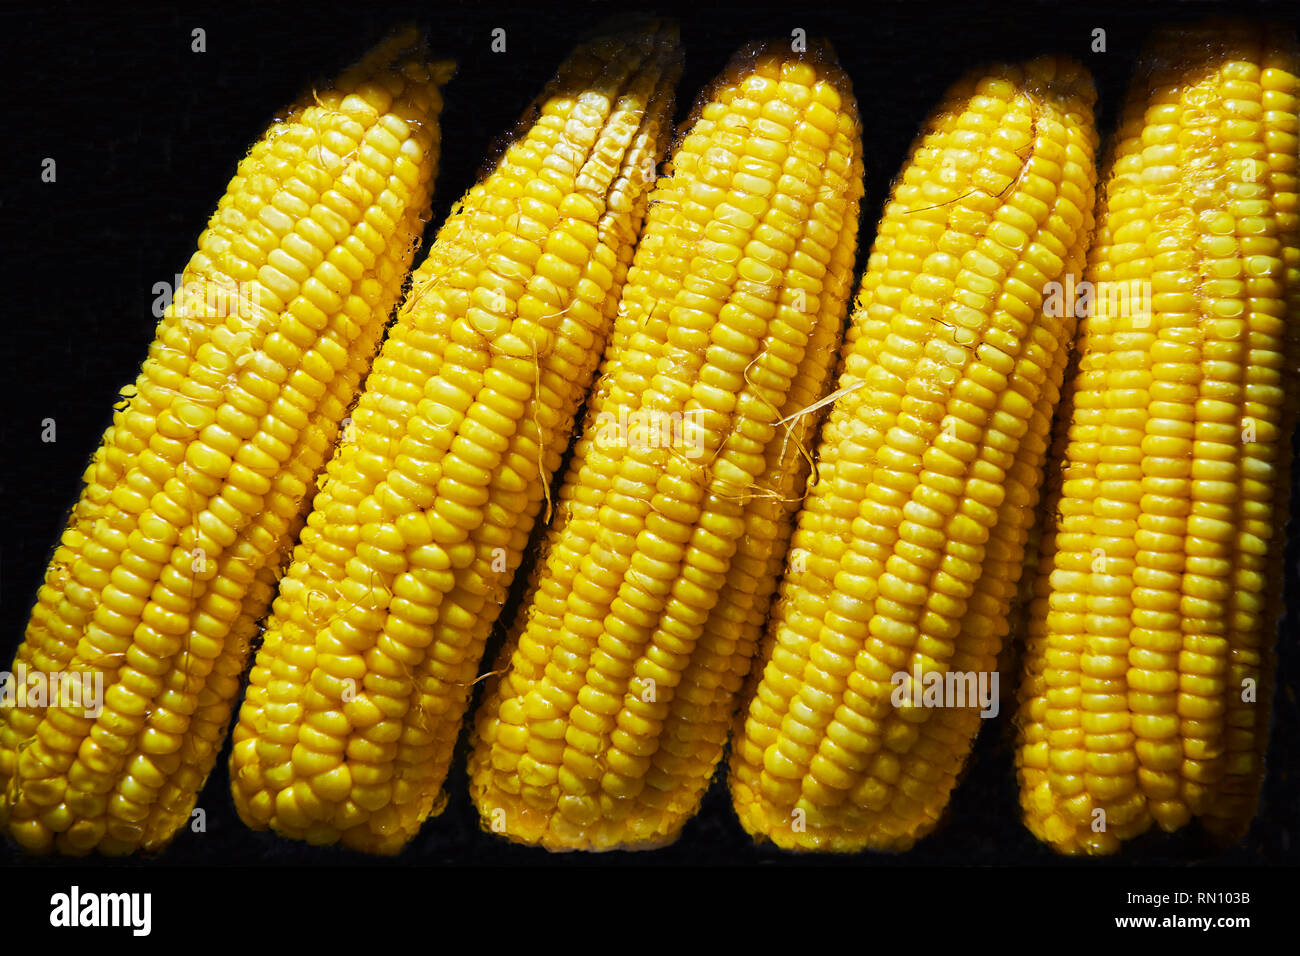 Close-up of ripe boiled yellow corn for sale inside a glass vitrine against a black background, seen on Boracay, Philippines Stock Photo